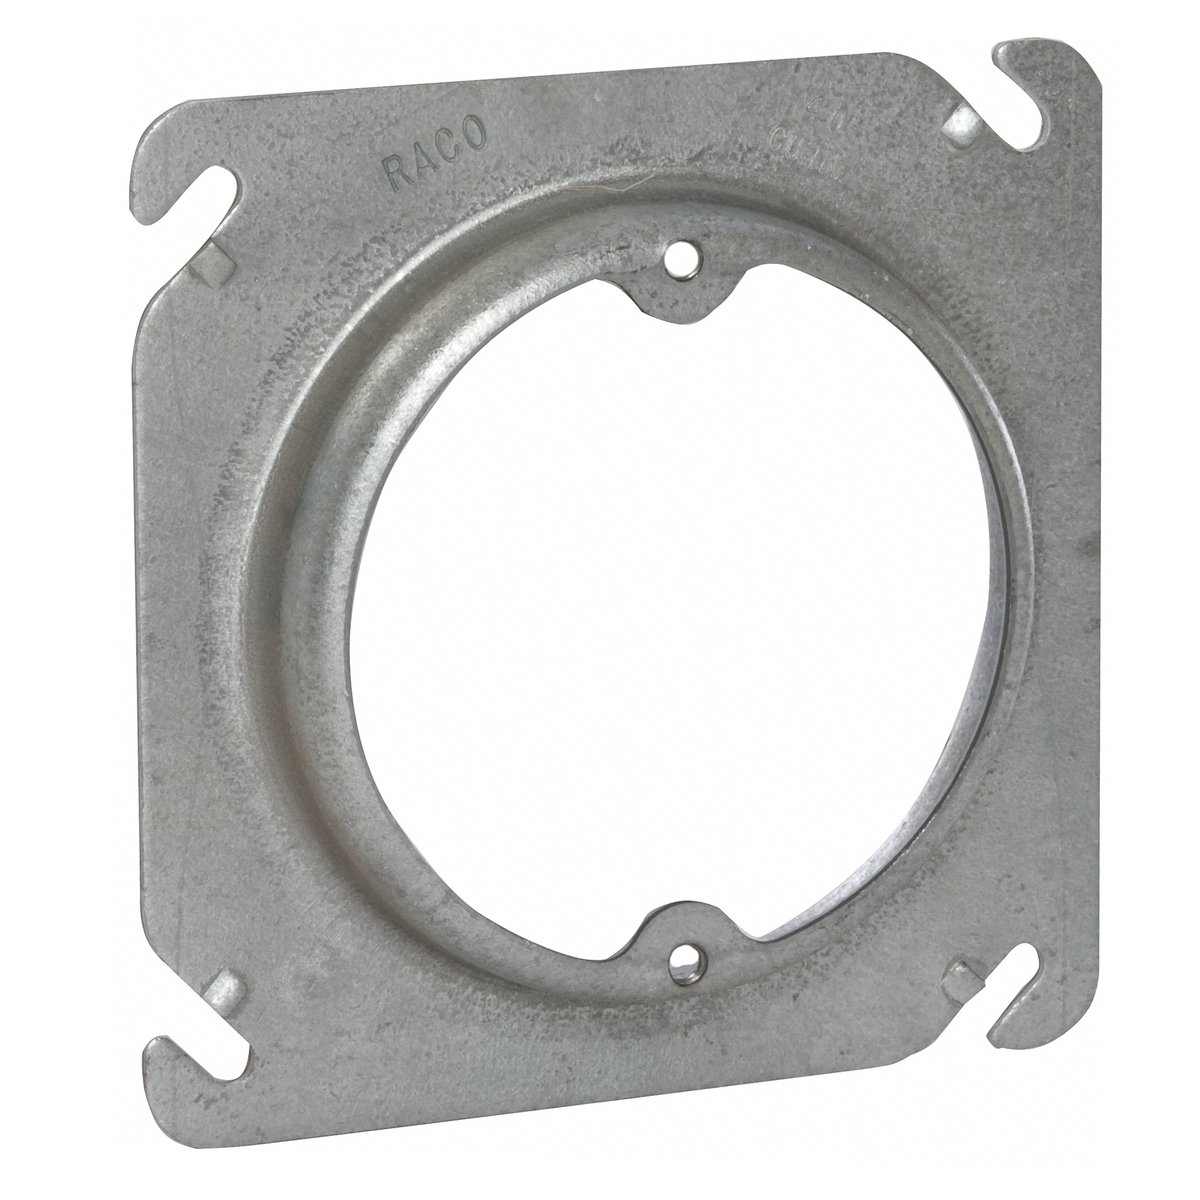 RACO 756 4" SQUARE BOX FIXTURE COVER, SQUARE TO ROUND RAISED 5/8", EARS 2-3/4" O.C.